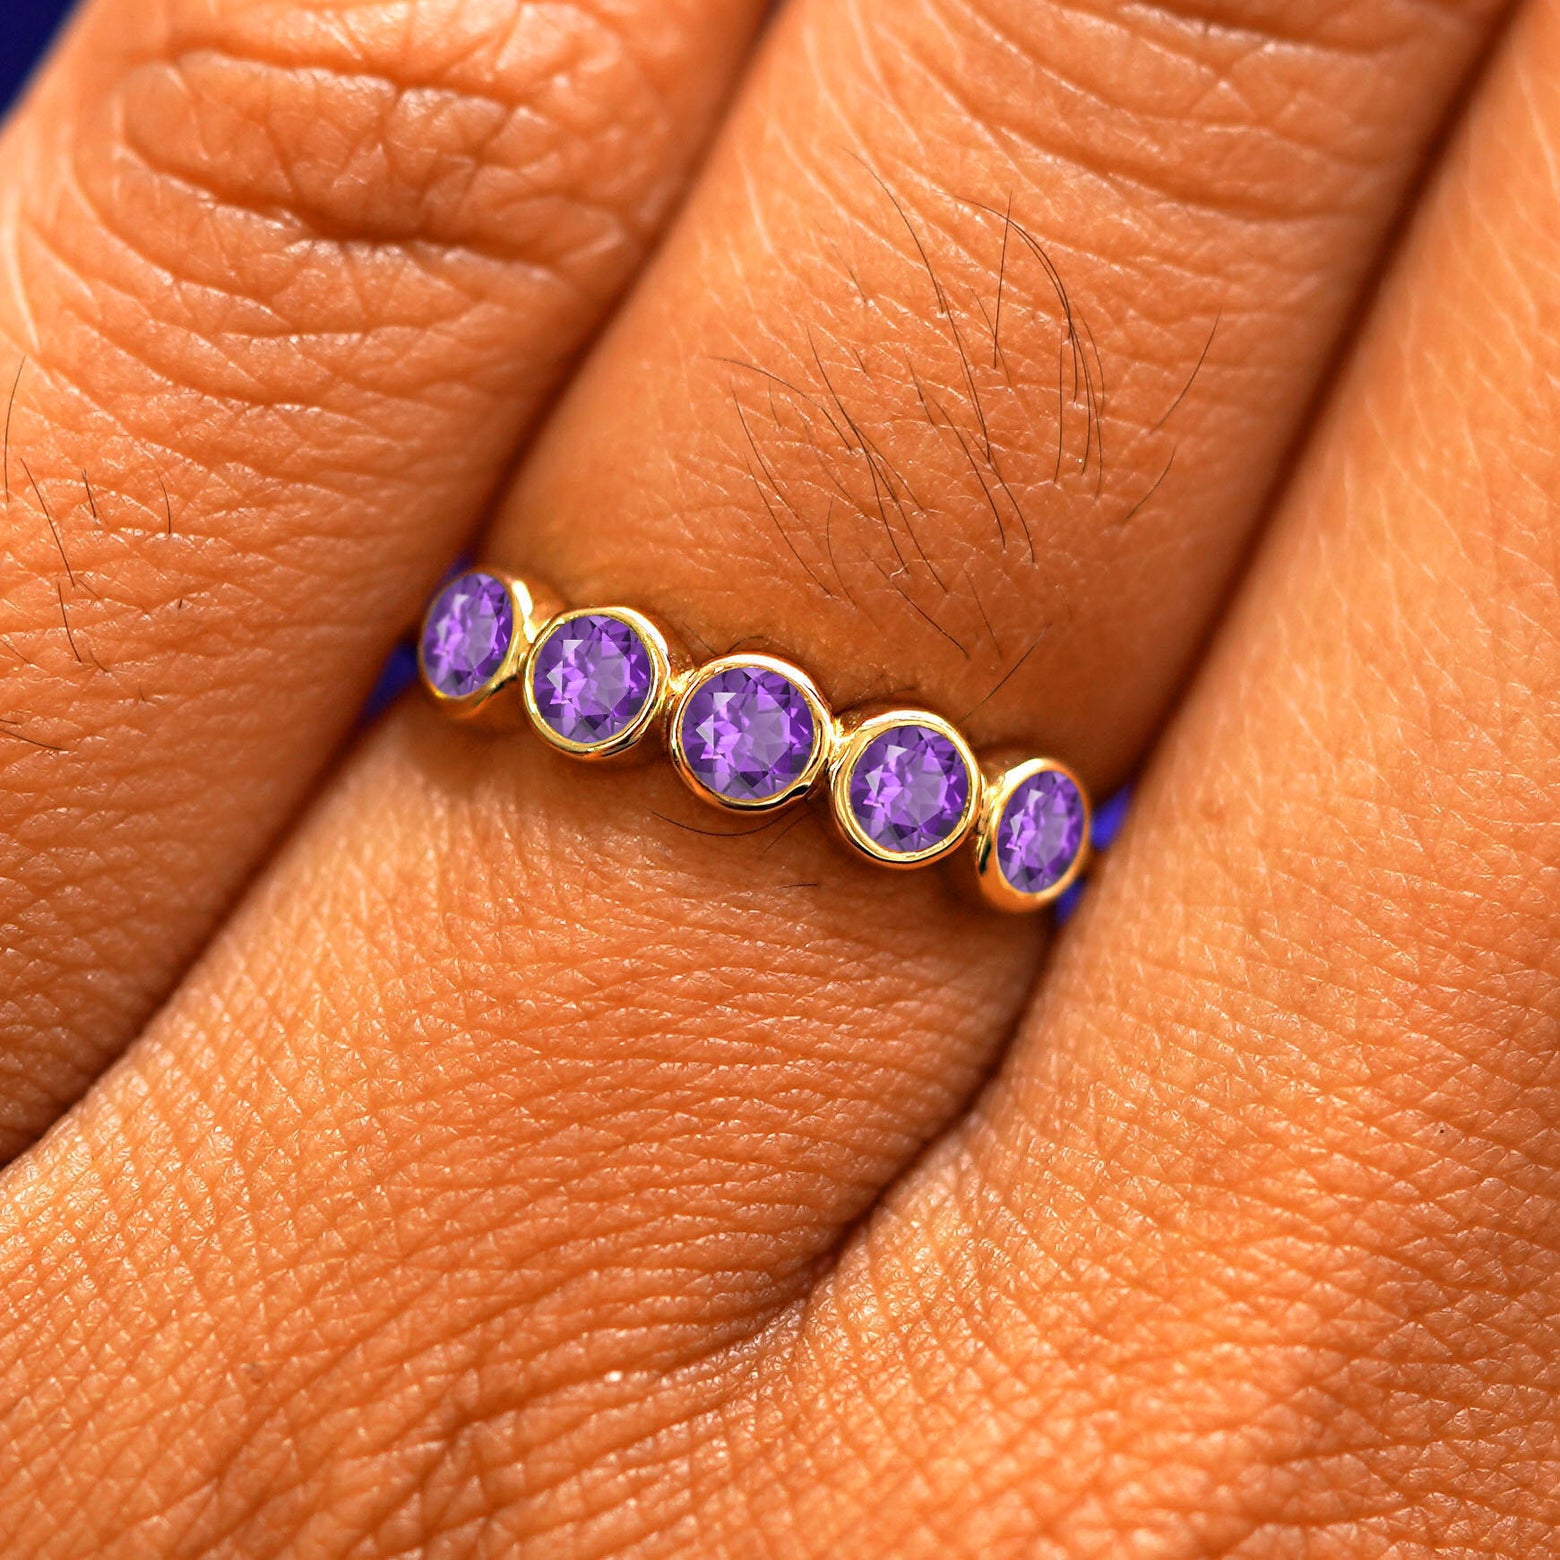 Close up view of a model's hand wearing a yellow gold 5 Gemstones Ring in amethyst